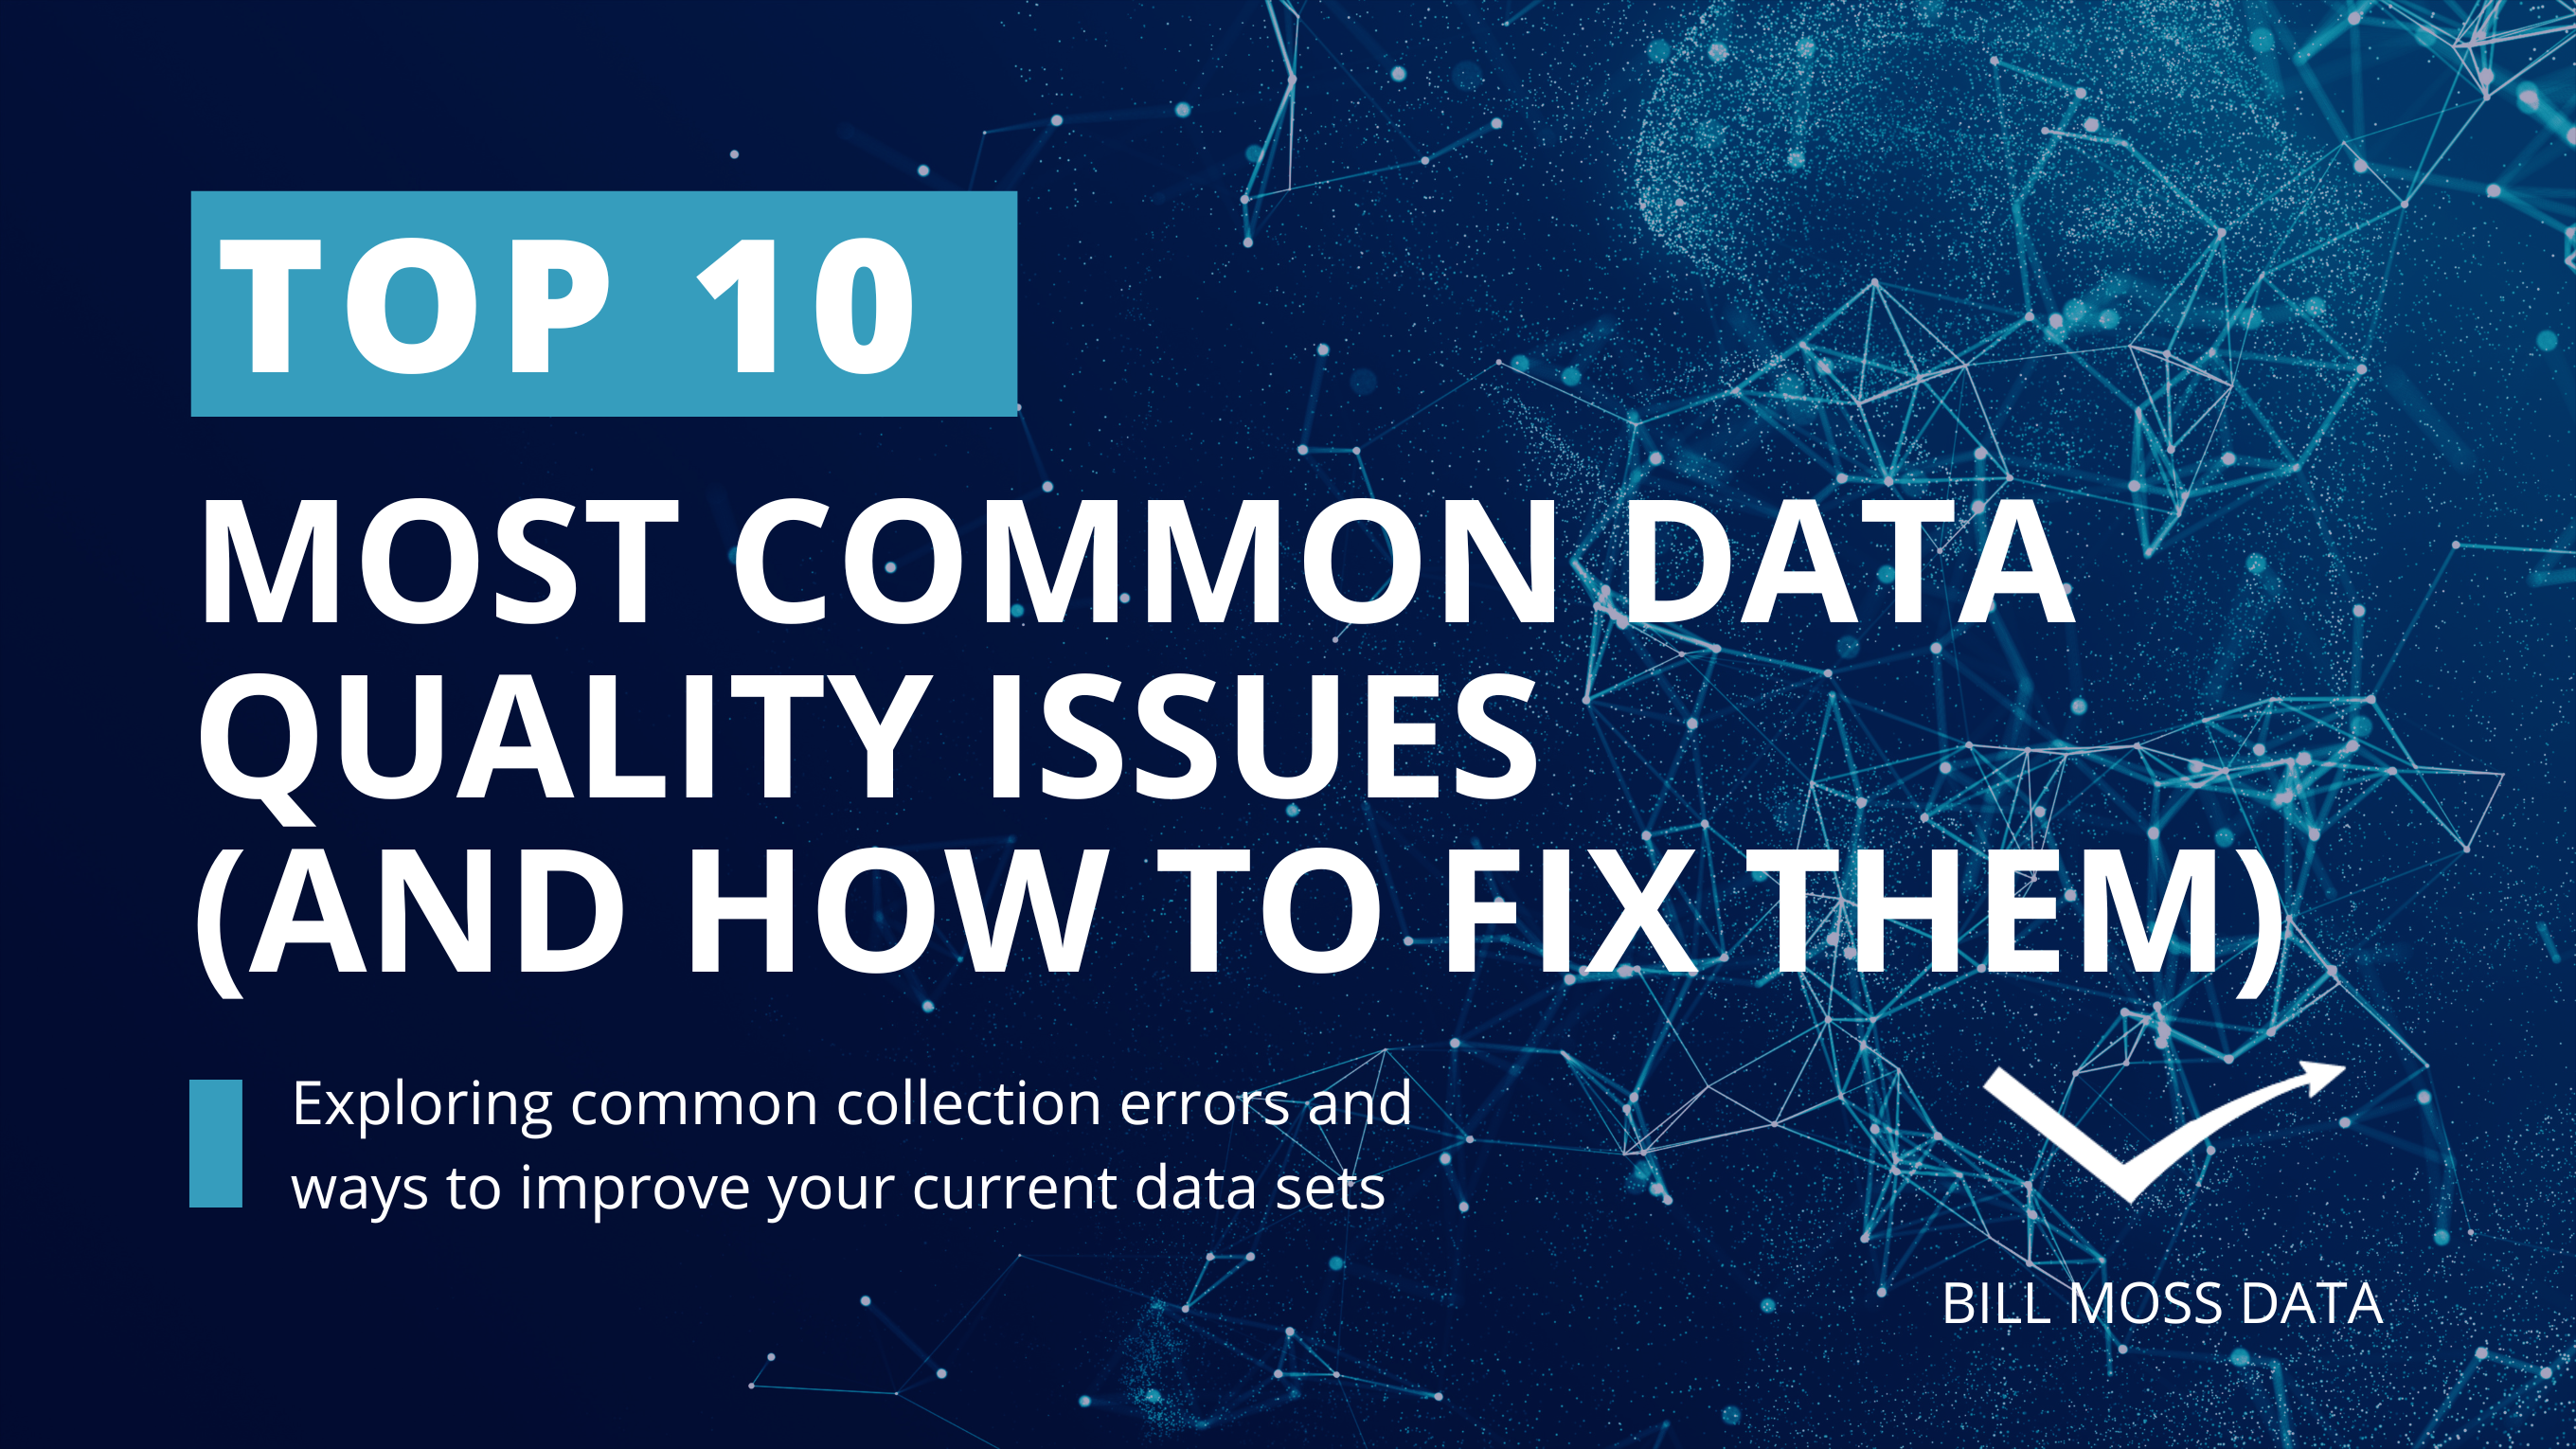 10 most common data quality issues and how to fix them